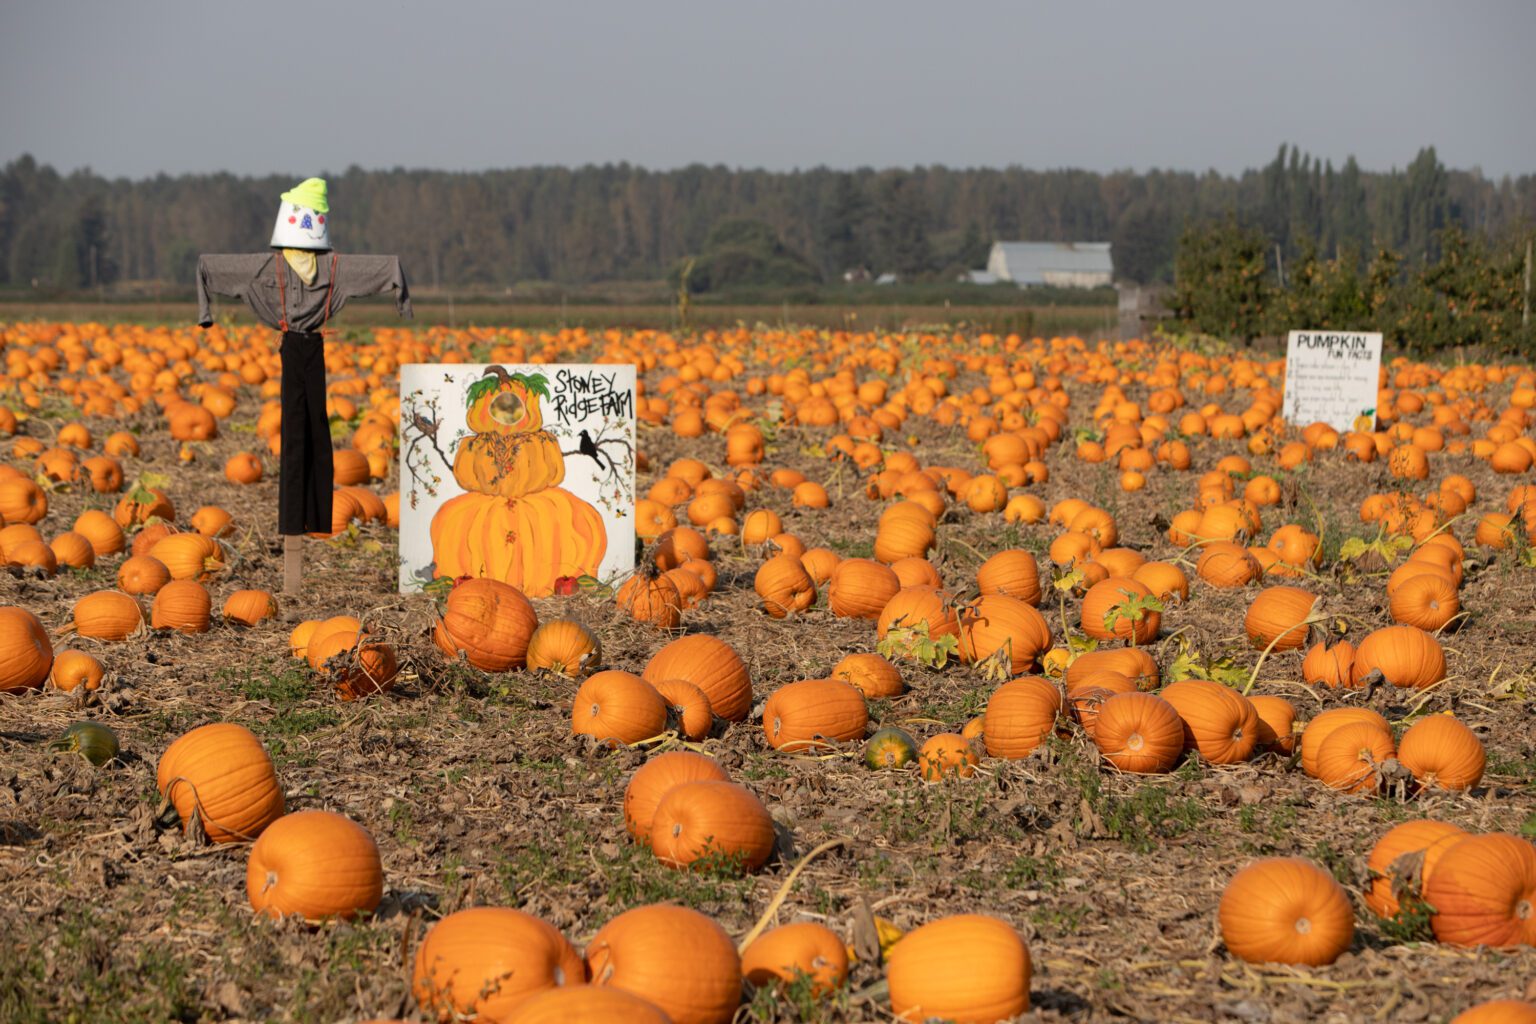 Hundreds of pumpkins are available for picking at Stoney Ridge Farm.